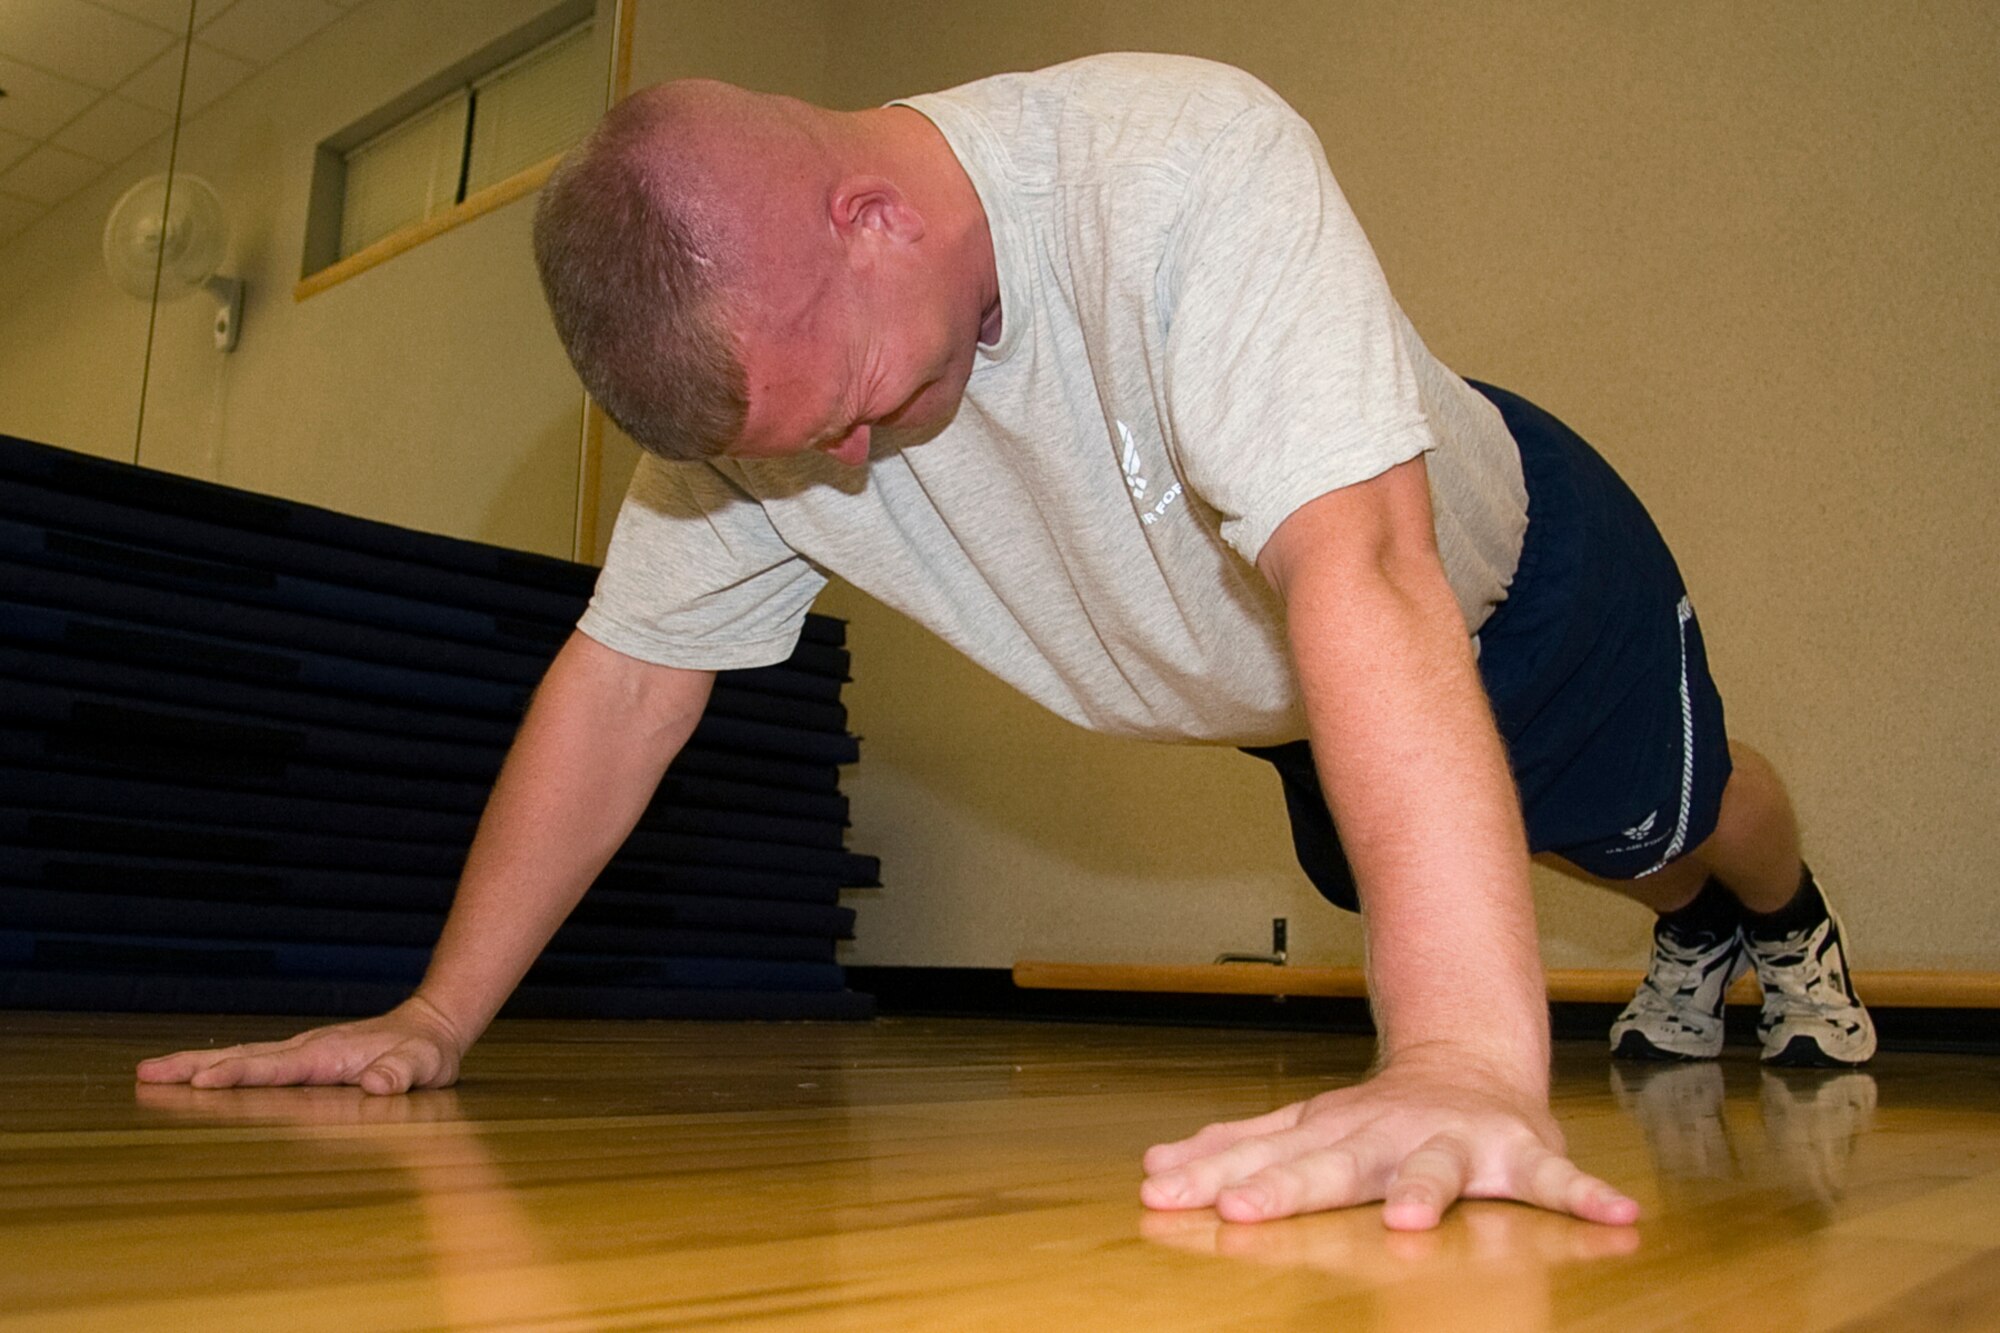 GRISSOM AIR RESERVE BASE, Ind. -- Staff Sgt. Joshua Carter strains to get those last couple pushups in before his minute is up during the pushup component of a fitness test he took here recently. Starting in July, the Air Force implemented new fitness assessment standards, which now include bi-annual testing, minimum requirements within testing components and establishing fitness assessment cells to proctor tests. Pushups count for ten of the possible 100 points. Sergeant Carter is a structural repair specialist with the 434th Maintenance Squadron. (U.S. Air Force photo/Tech. Sgt. Mark R. W. Orders-Woempner)